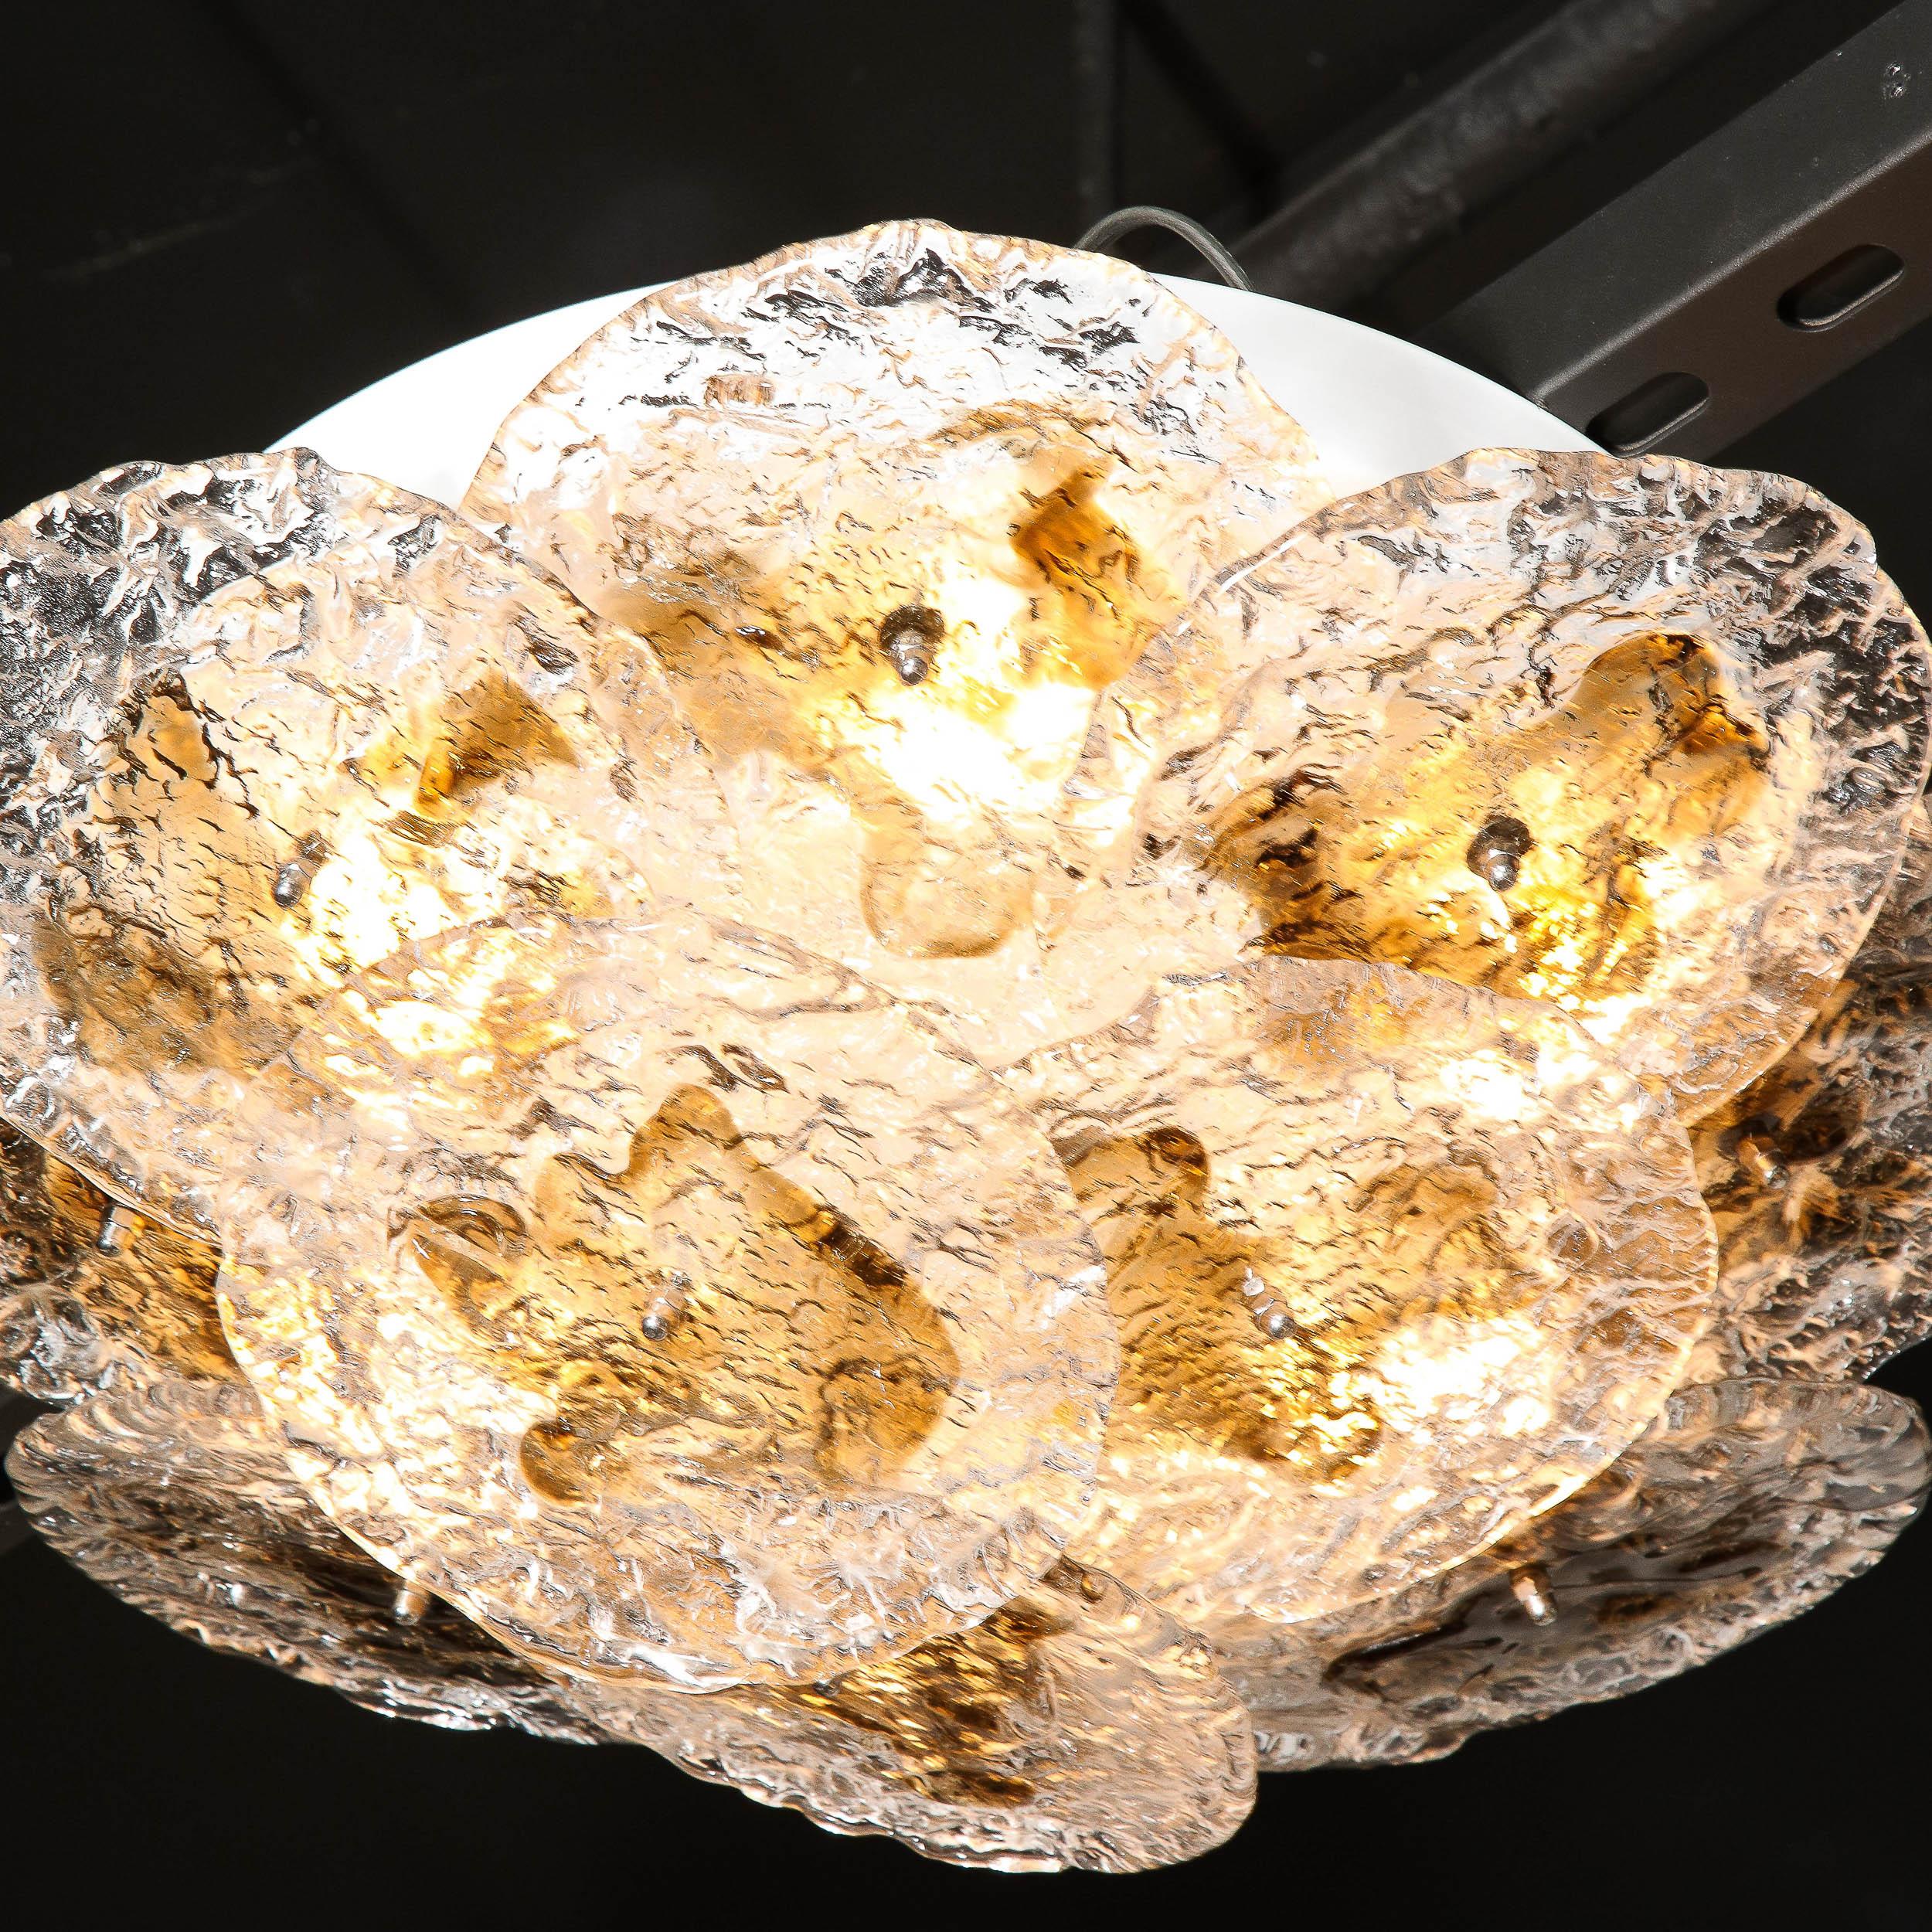 This beautiful Mid Century Modern flush mount chandelier was realized by the legendary atelier of Mazzega in Murano, Italy- the island off the coast of Venice renowned for centuries for its superlative glass production- circa 1970. It features an